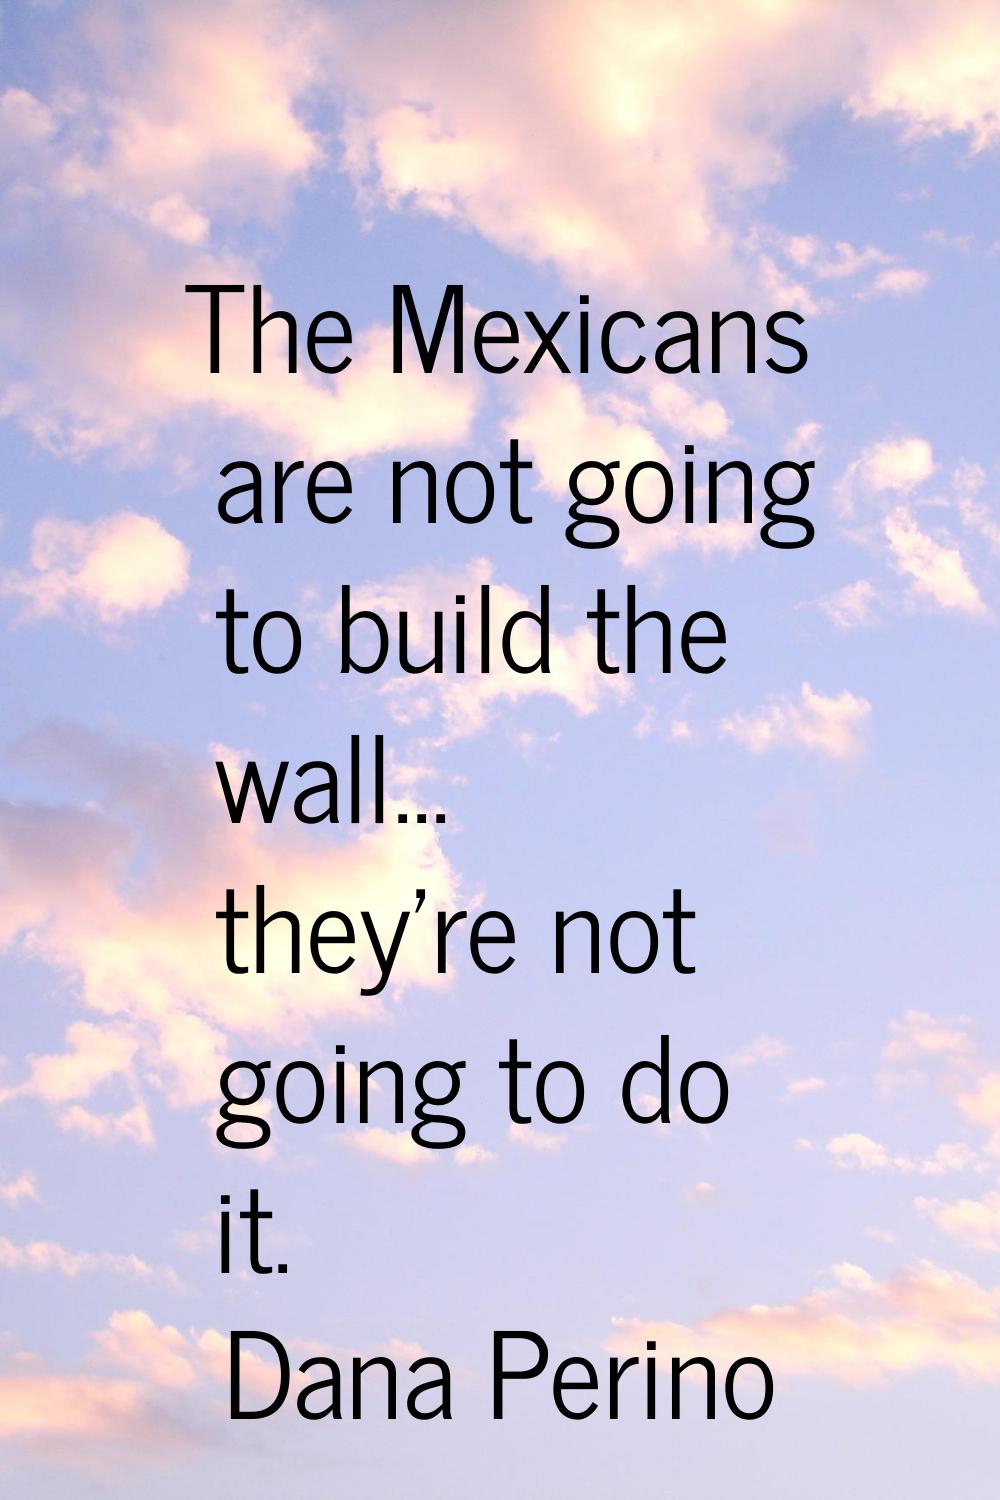 The Mexicans are not going to build the wall... they're not going to do it.